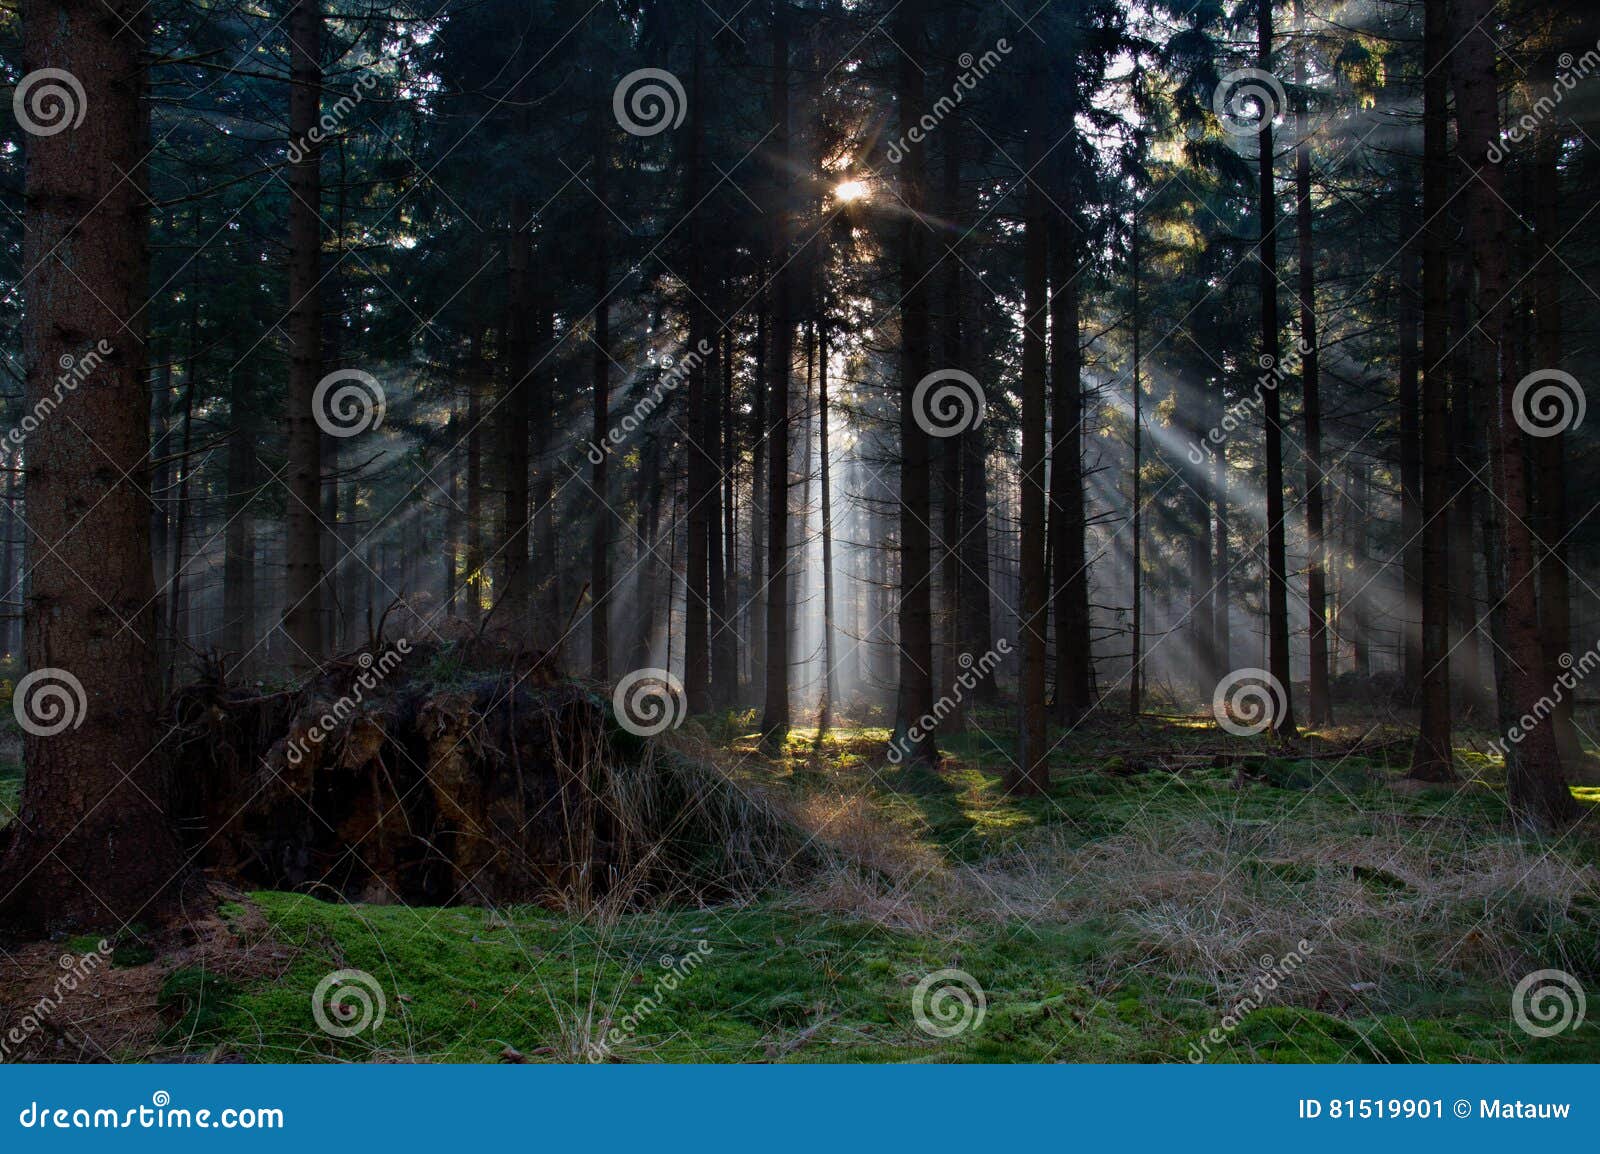 sunbeams in a forest